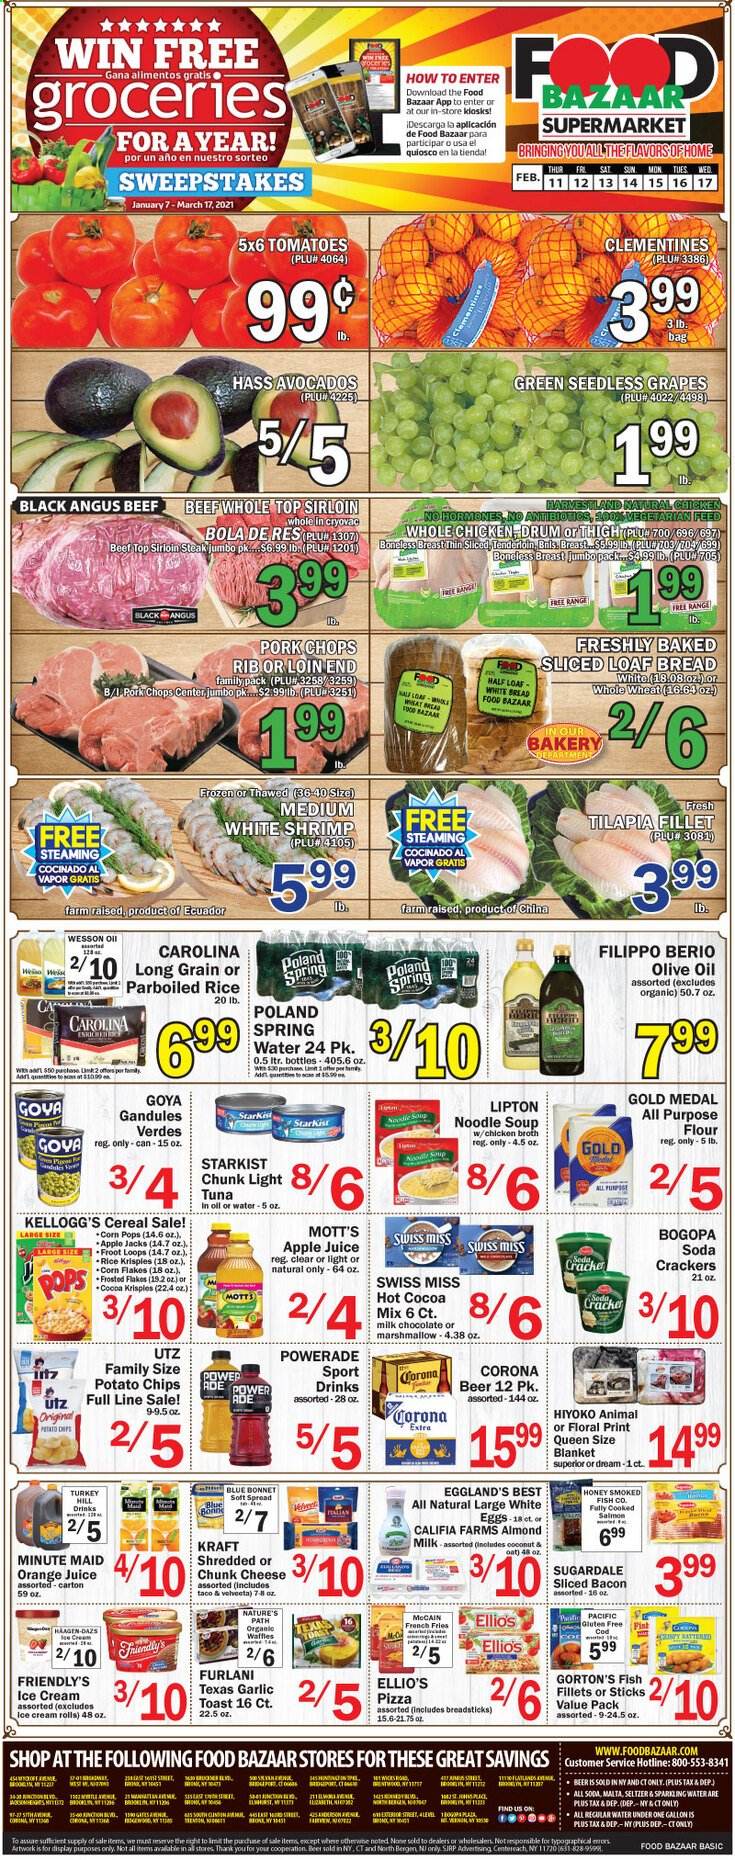 thumbnail - Food Bazaar Flyer - 02/11/2021 - 02/17/2021 - Sales products - seedless grapes, bread, bread sticks, toast bread, fish fillets, salmon, tilapia, tuna, fish, shrimps, Gorton's, StarKist, pizza, soup, Kraft®, bacon, cheese, chunk cheese, almond milk, eggs, ice cream, Häagen-Dazs, Friendly's Ice Cream, potato fries, french fries, milk chocolate, chocolate, crackers, Kellogg's, Swiss Miss, potato chips, all purpose flour, flour, chicken broth, oats, broth, garlic, light tuna, Goya, cereals, corn flakes, Corn Pops, rice, parboiled rice, noodles, olive oil, honey, apple juice, Powerade, orange juice, soda, juice, Lipton, Mott's, seltzer water, hot cocoa, beer, Corona Extra, whole chicken, beef meat, beef sirloin, steak, sirloin steak, pork chops, pork meat, avocado, clementines, grapes. Page 1.